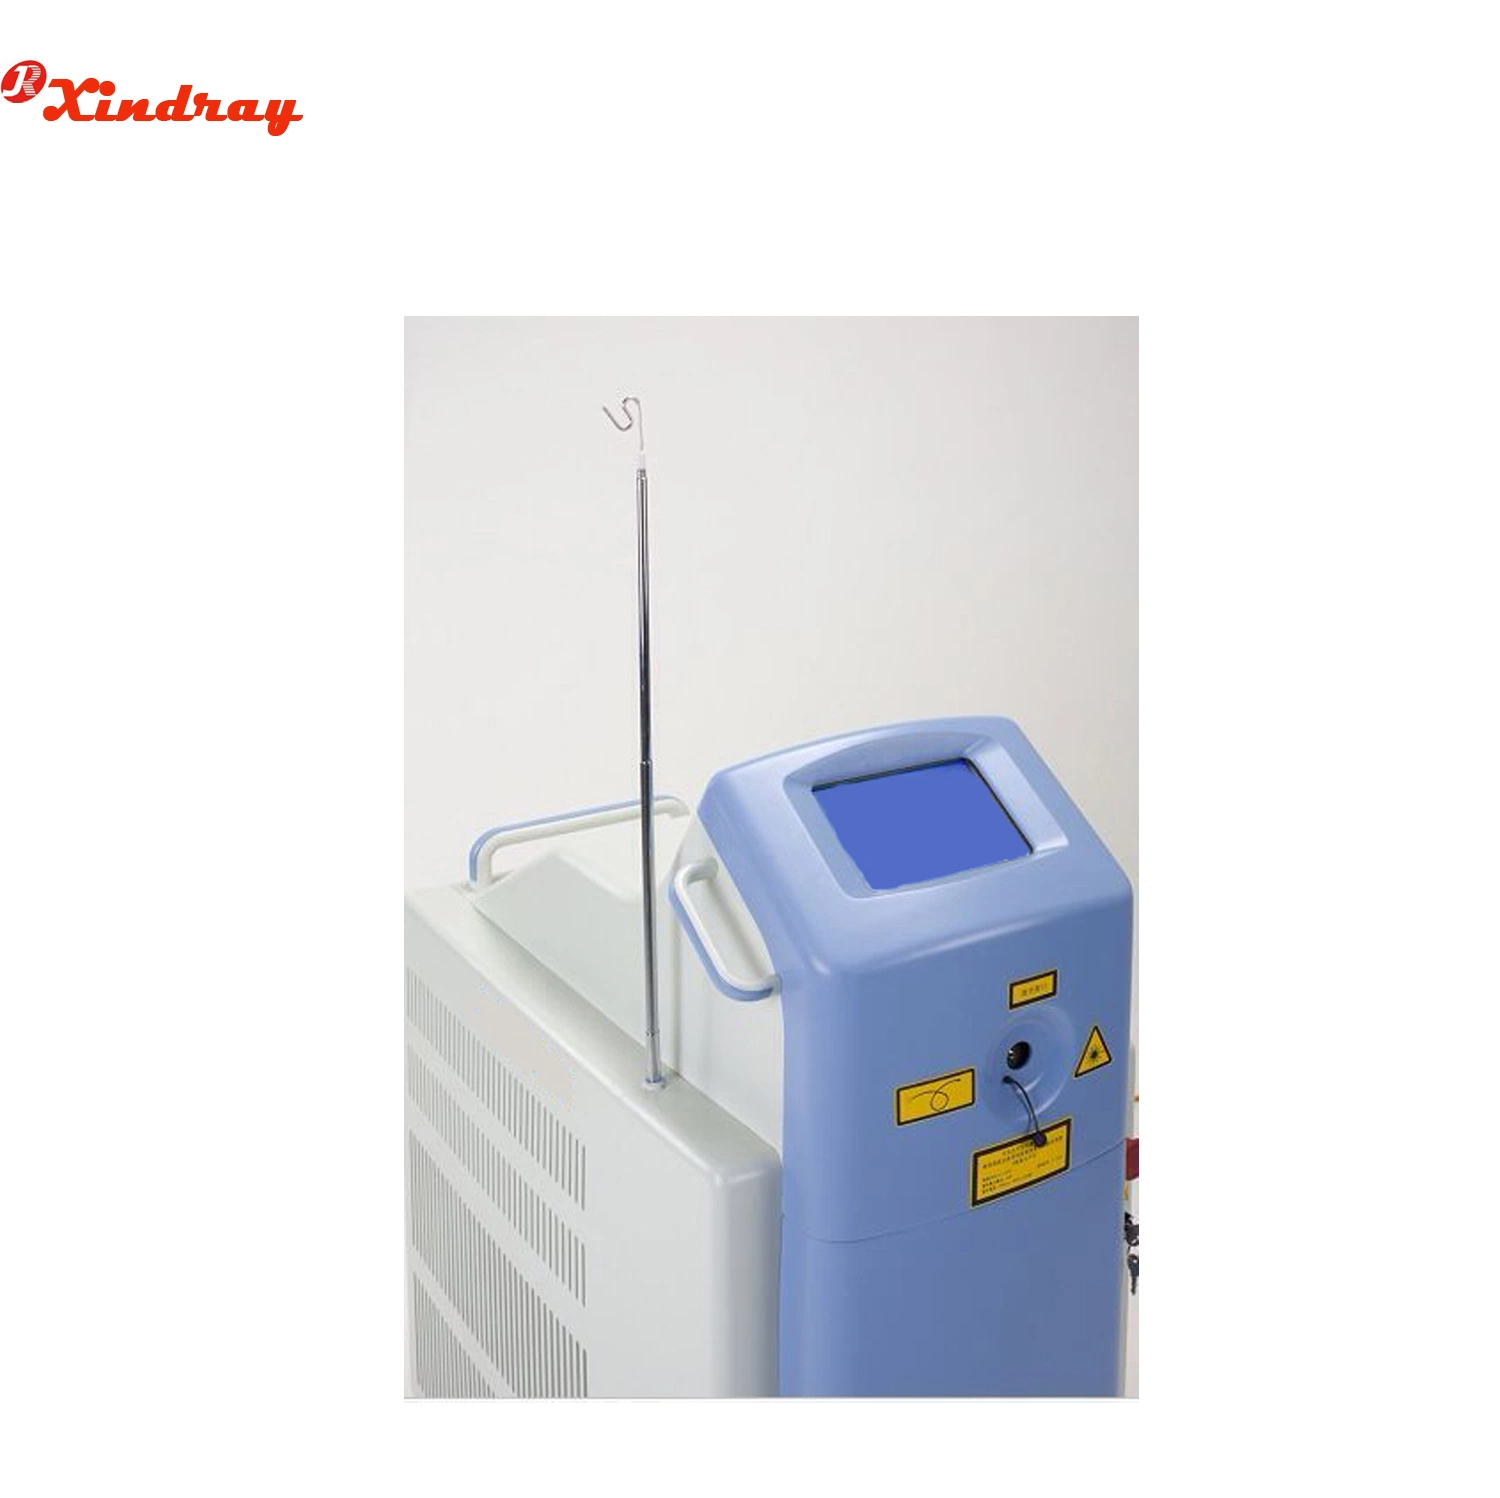 Medical Surgical Equipment Urology Holmium Laser for Surgical Treatments